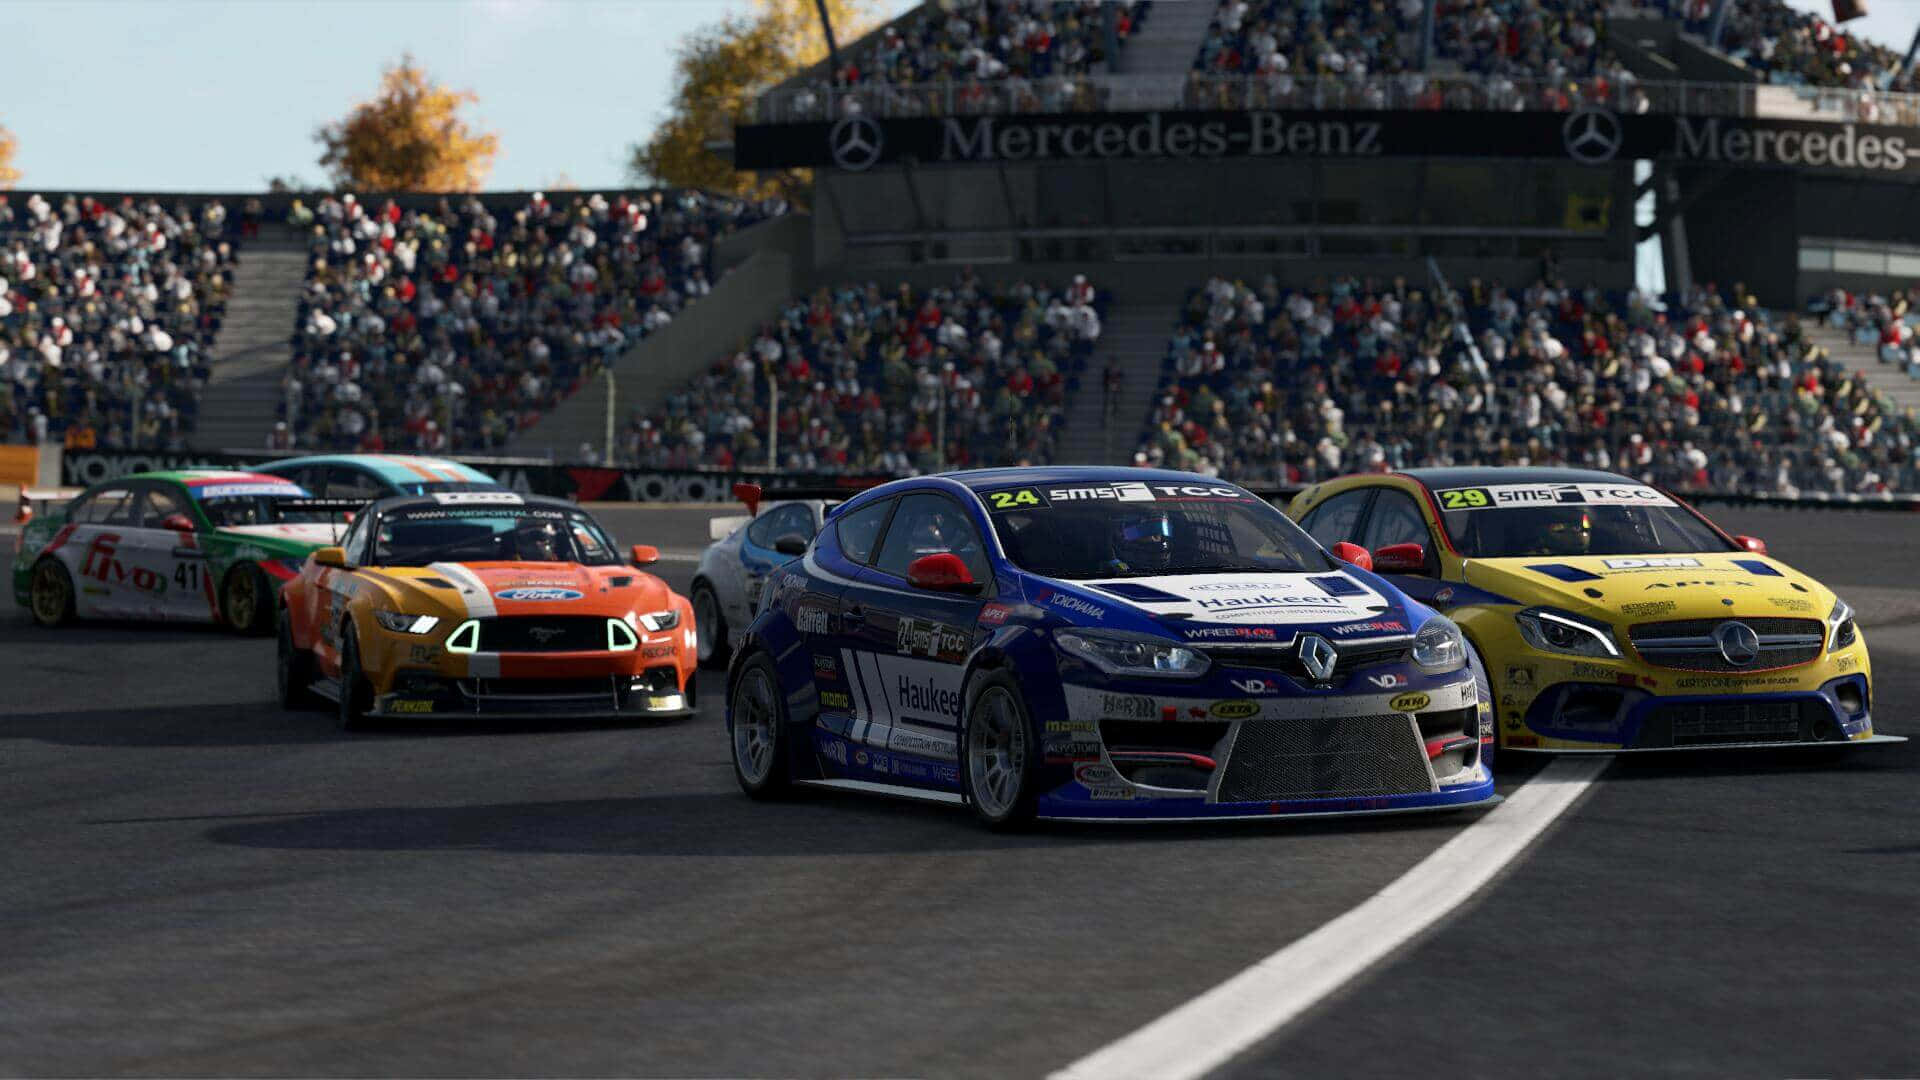 Get behind the wheel of the Best Project Cars 2 and experience the thrill of virtual racing!